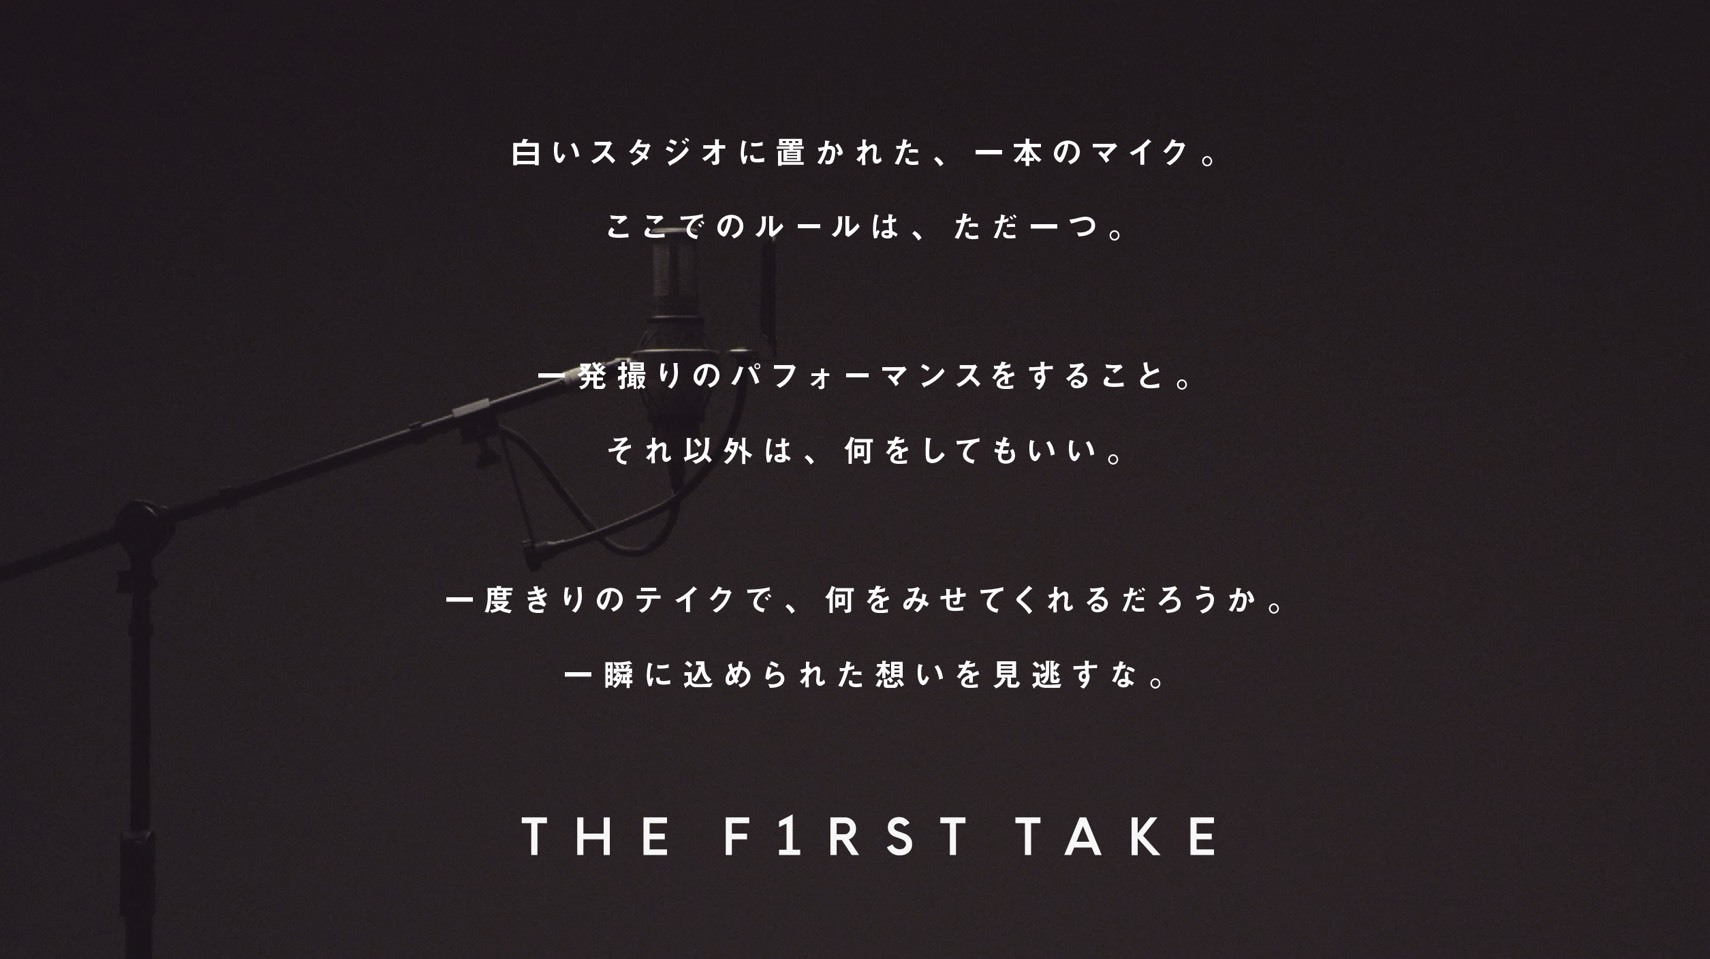 「THE FIRST TAKE」ステートメント